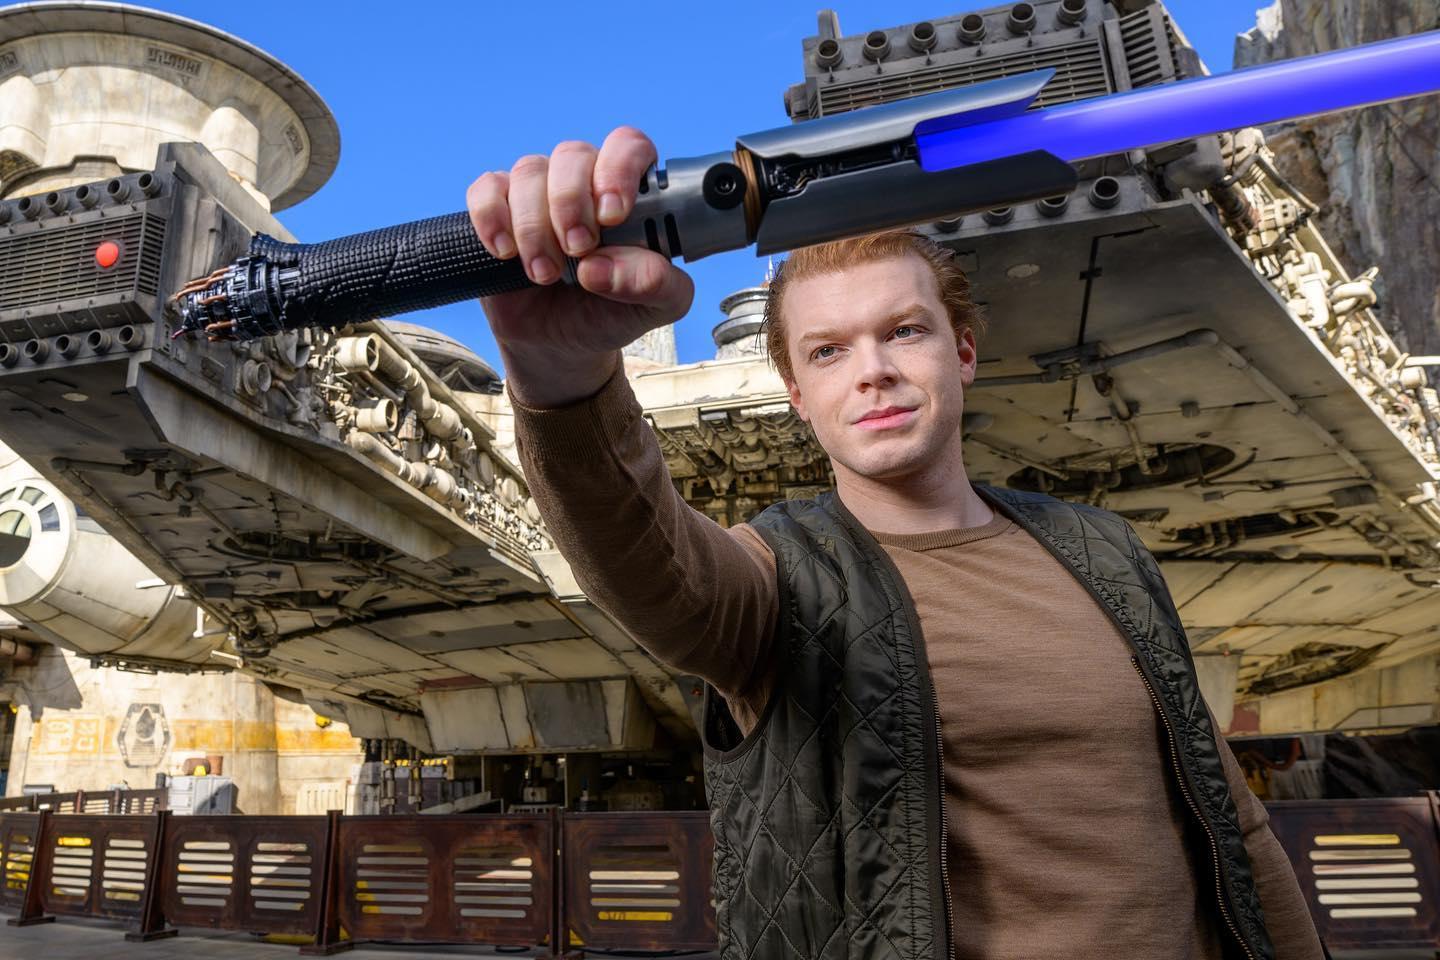 Cameron Monaghan with a lightsaber